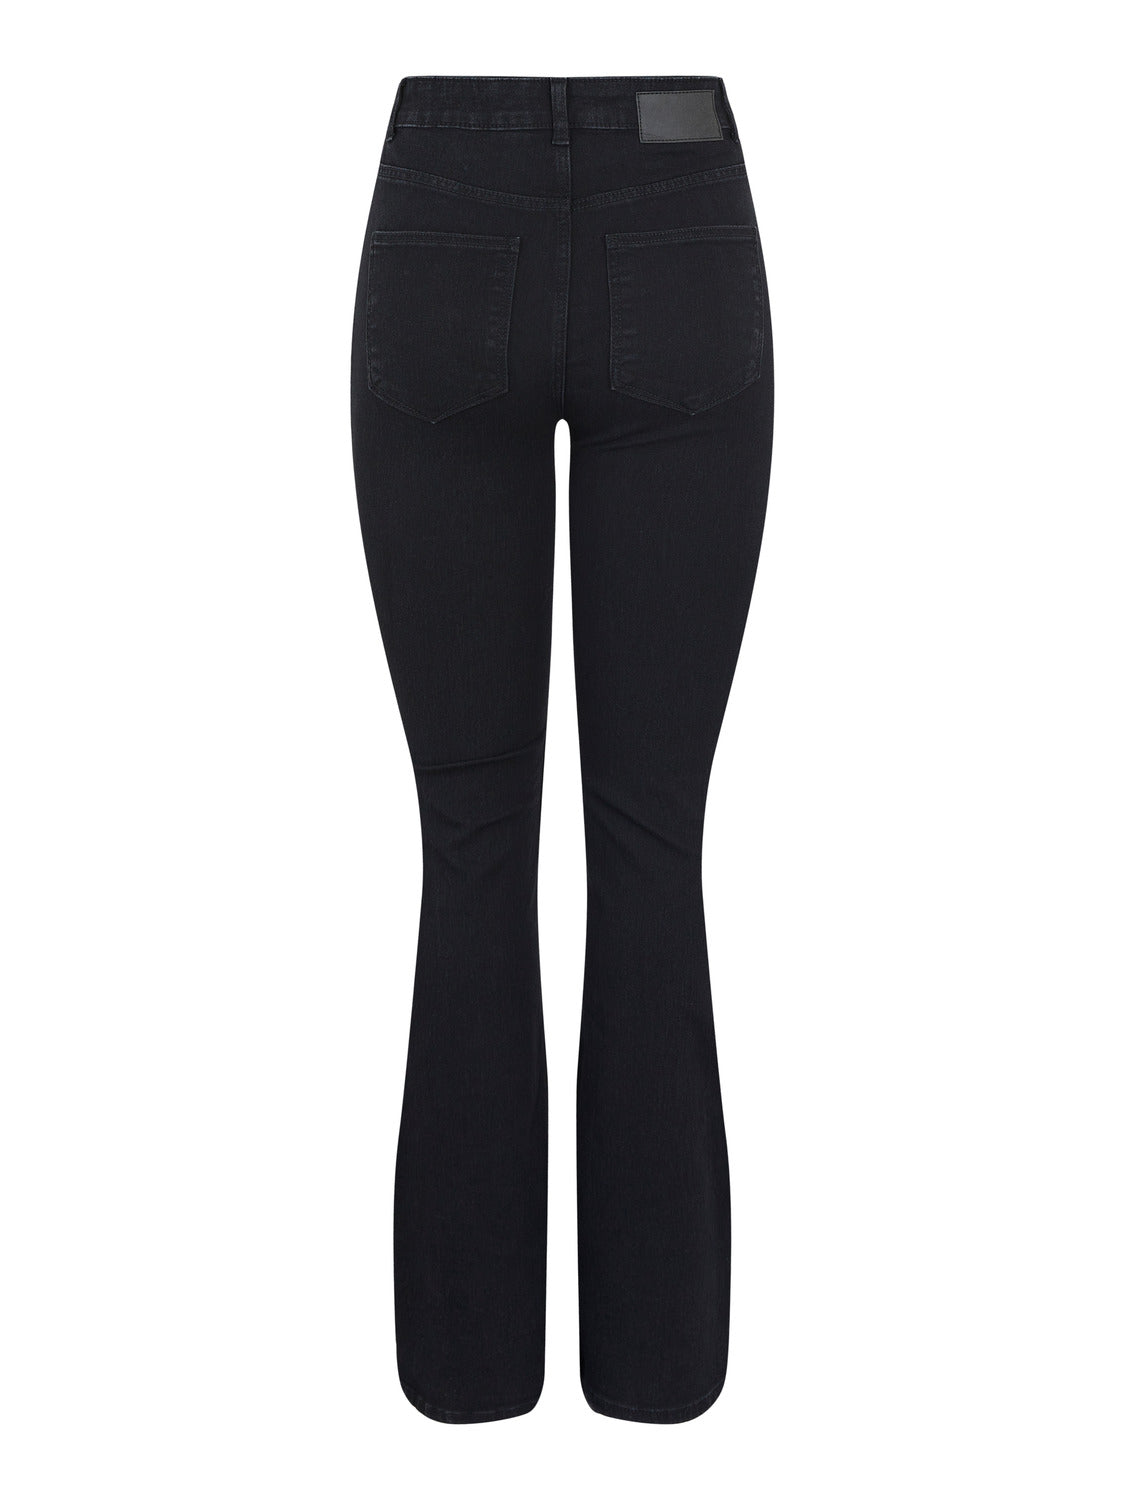 PCPEGGY Jeans - black